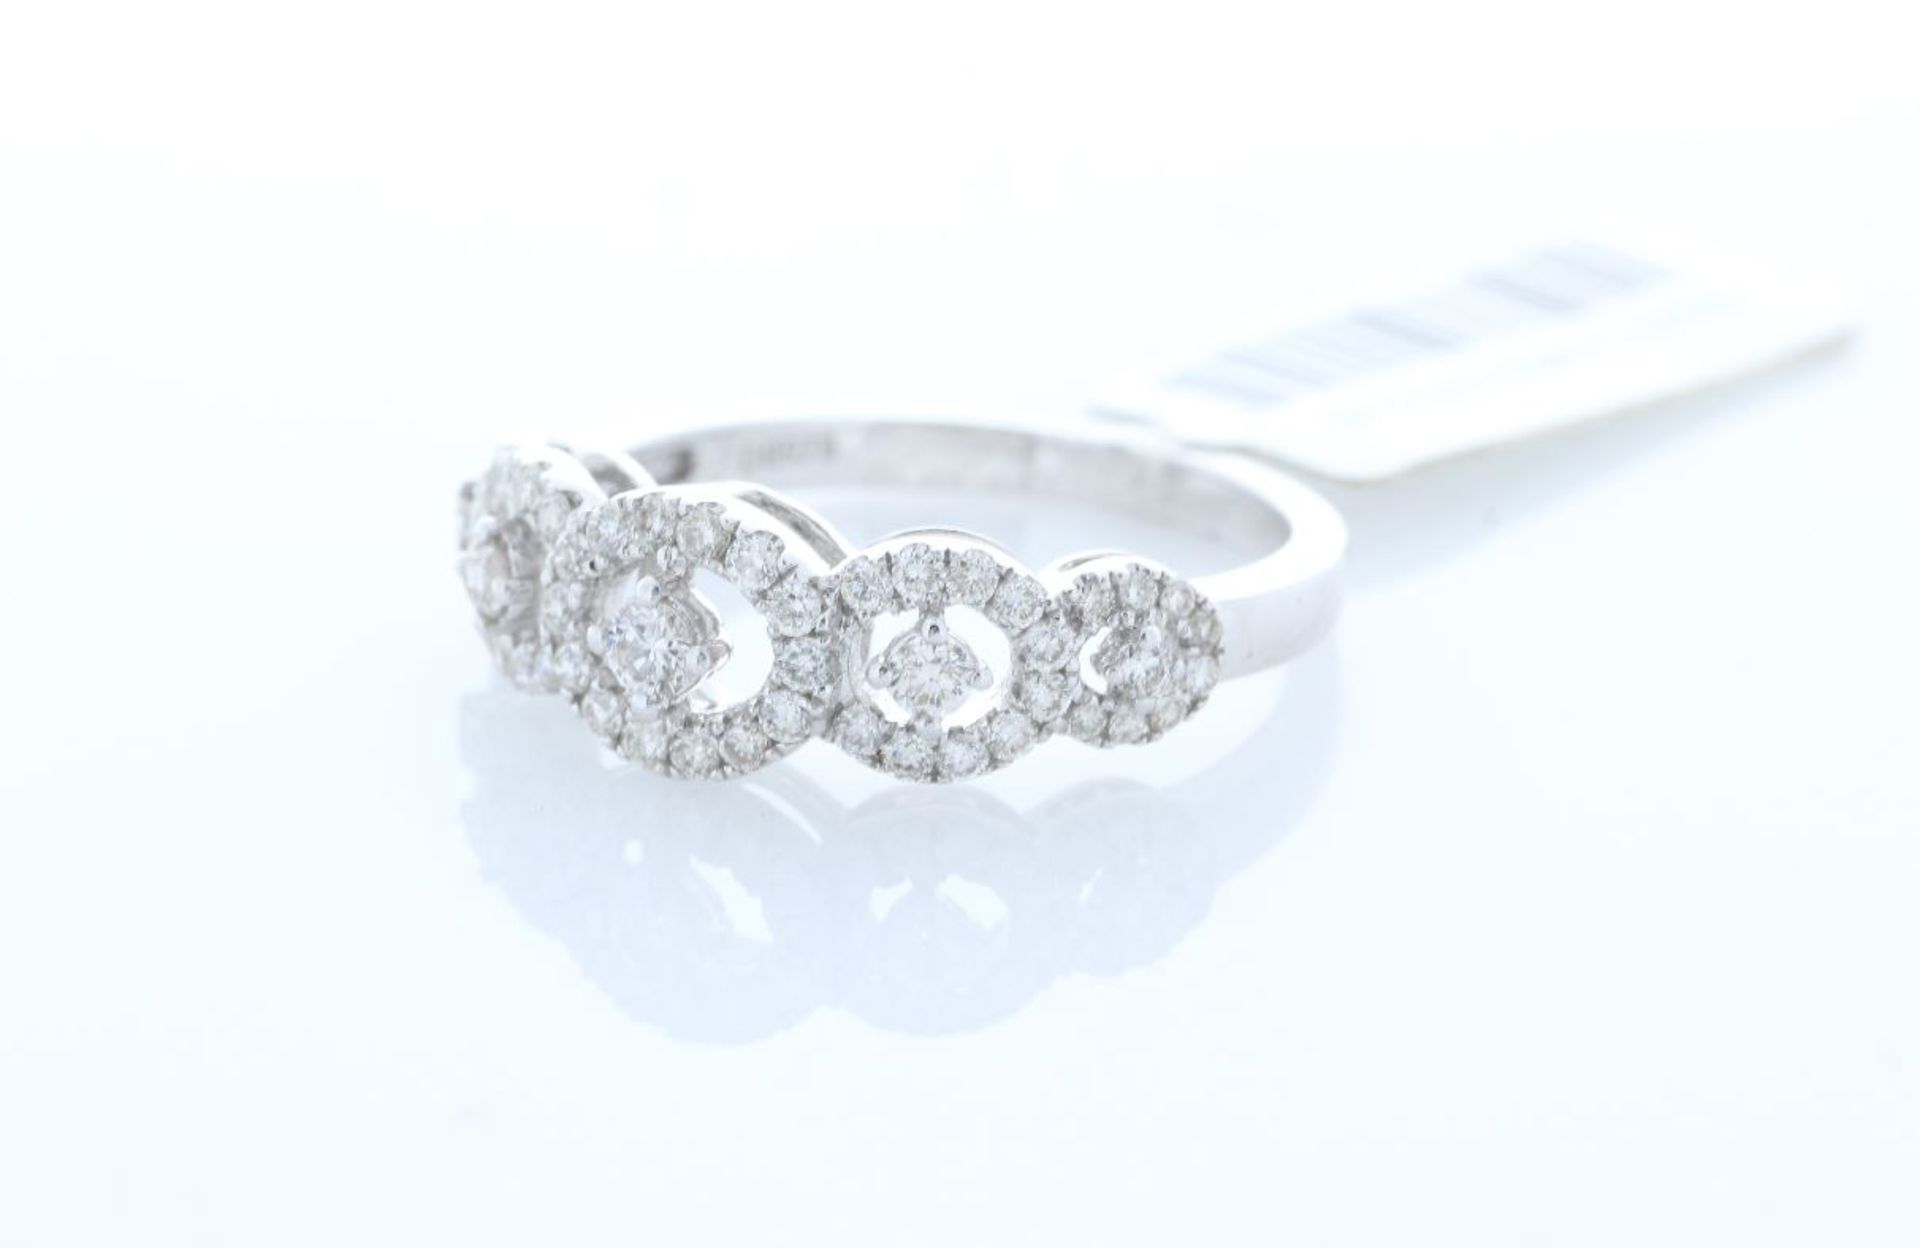 18ct White Gold Half Eternity Style Diamond Ring 0.57 Carats - Valued by GIE £6,495.00 - Fifty - Image 2 of 5